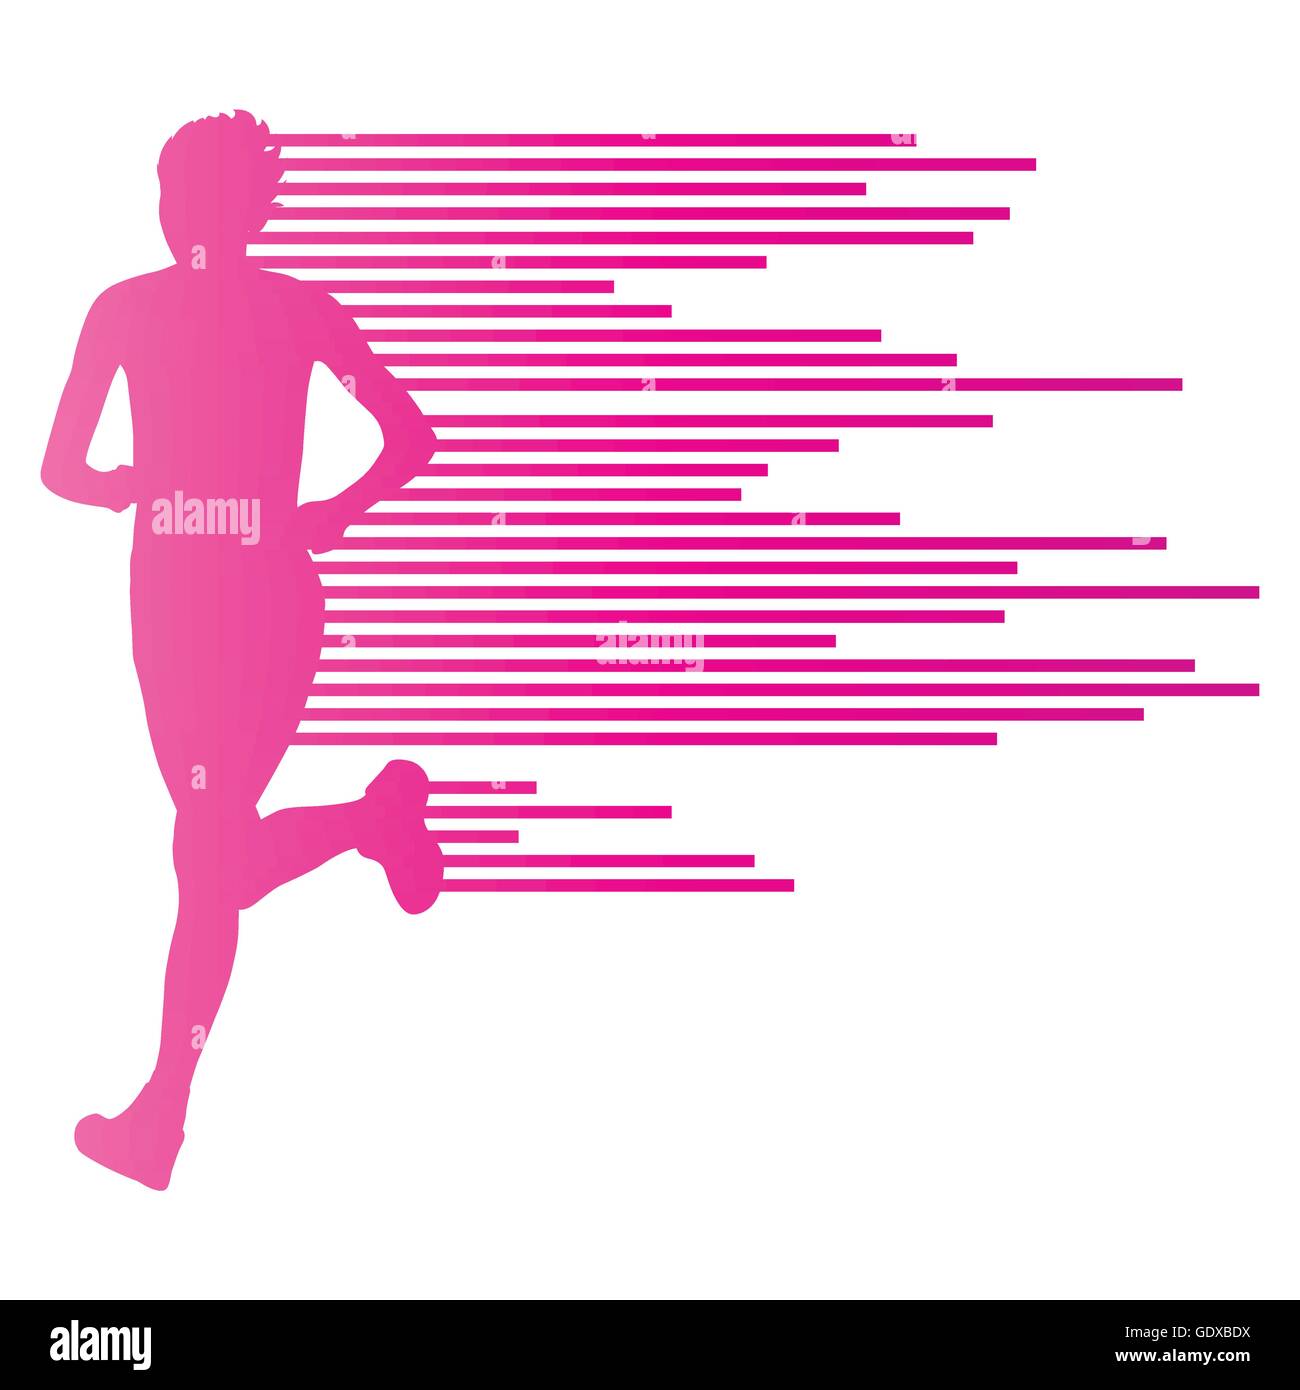 Vector Silhouettes Of Running Women. Girl Runs And Casts A Shadow. Run,  Runner, Athlete Royalty Free SVG, Cliparts, Vectors, and Stock  Illustration. Image 58020975.